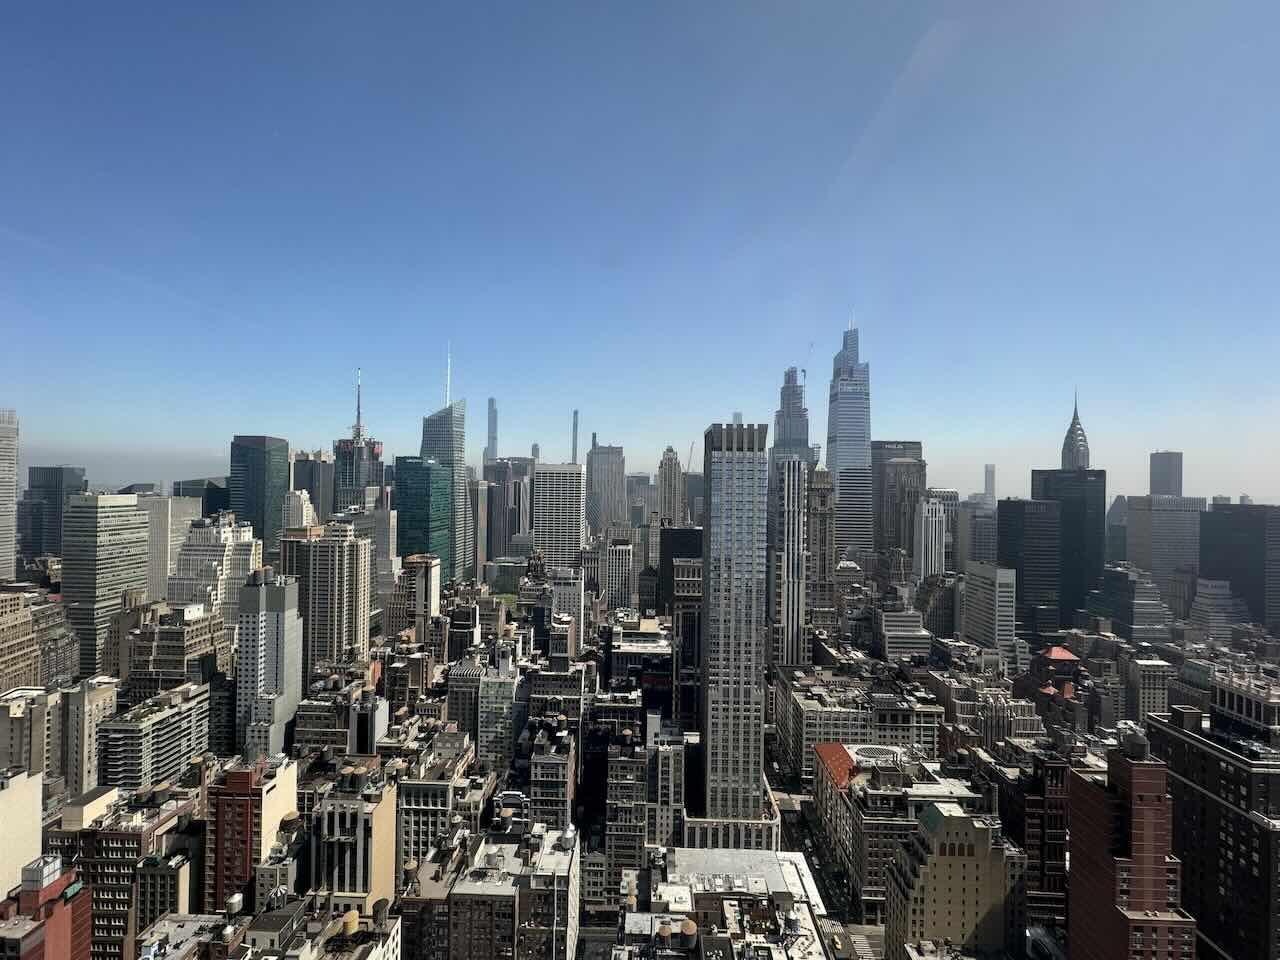 A panoramic view of a New York City skyline featuring the Empire State Building.